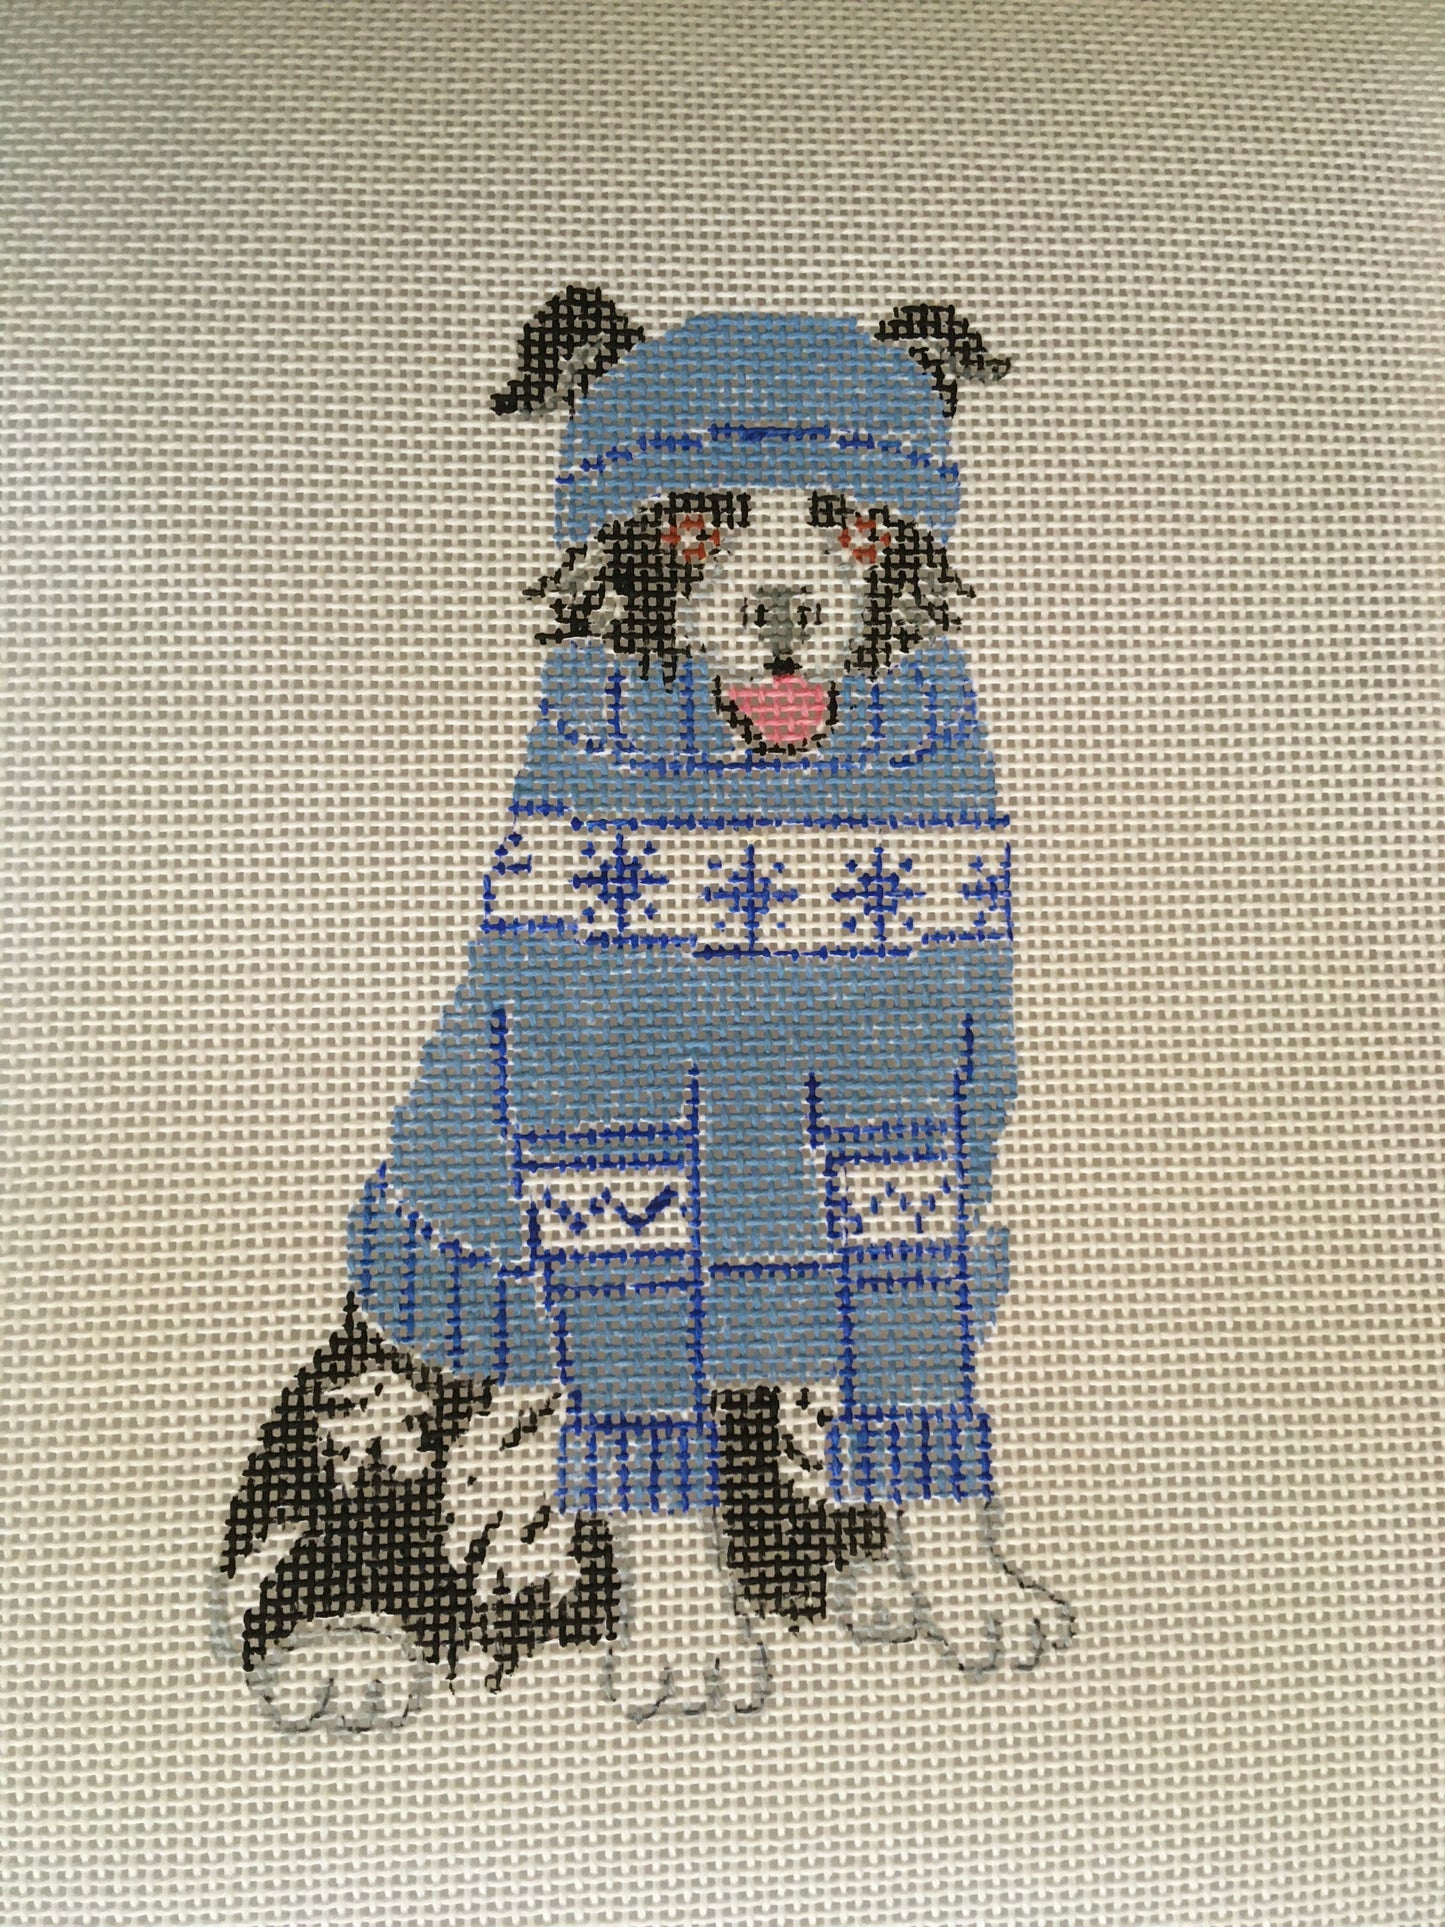 #1 January Dog with stitch guide